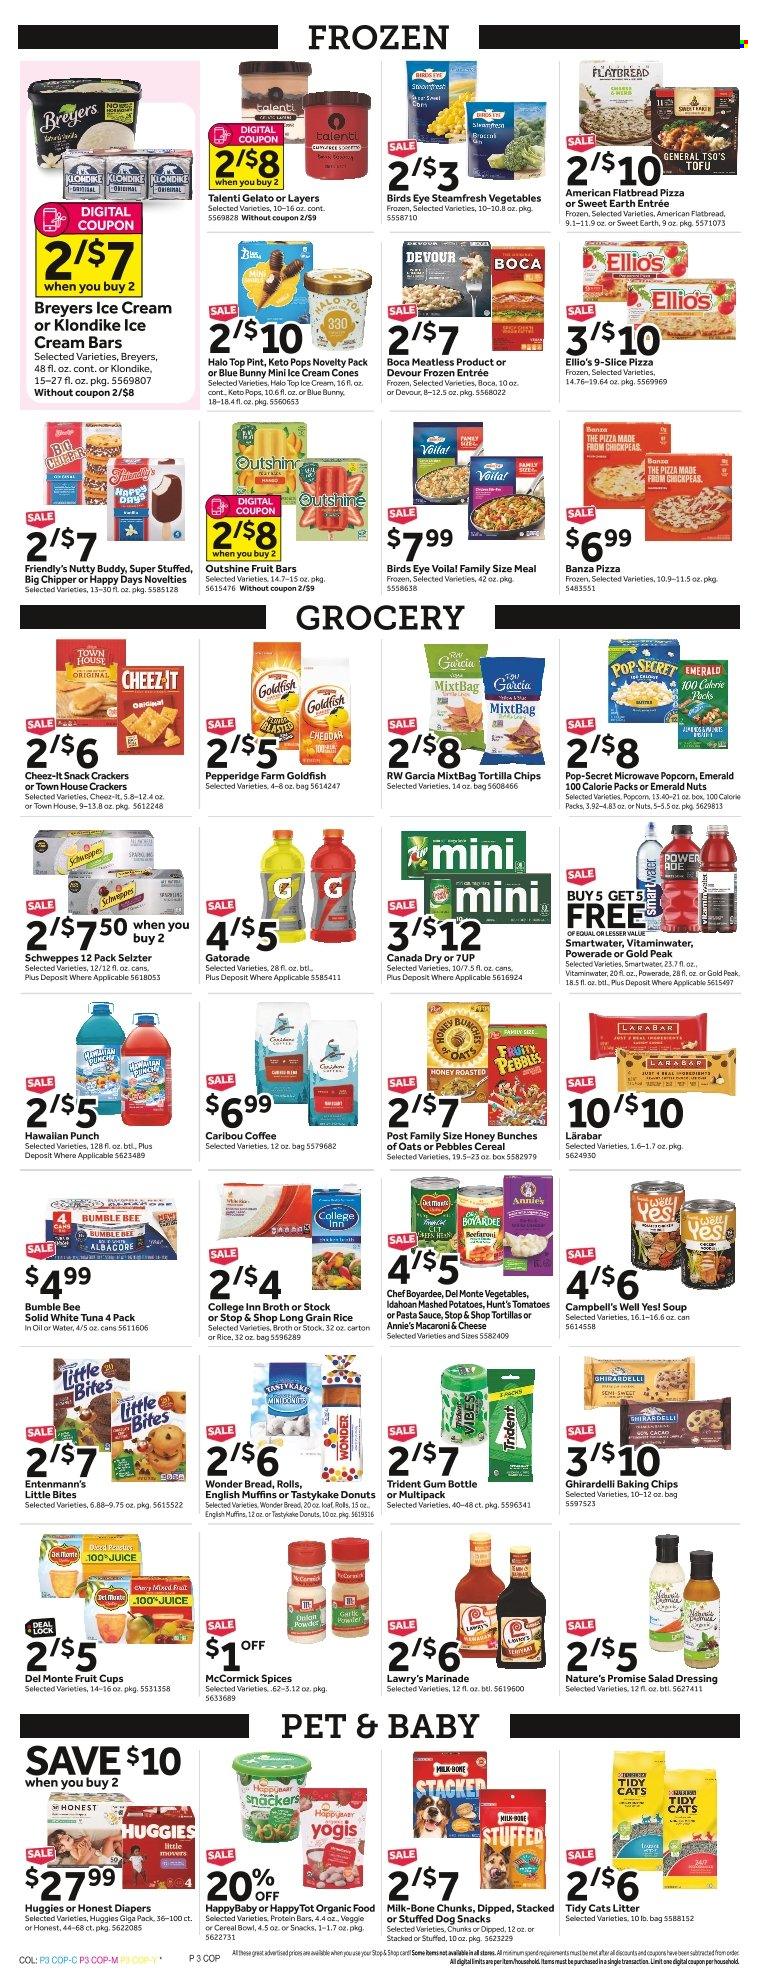 thumbnail - Stop & Shop Flyer - 09/23/2022 - 09/29/2022 - Sales products - english muffins, Nature’s Promise, flatbread, donut, Entenmann's, cherries, fruit cup, tuna, Campbell's, macaroni & cheese, mashed potatoes, pizza, pasta sauce, soup, Bumble Bee, Bird's Eye, Annie's, tofu, milk, ice cream bars, Talenti Gelato, Friendly's Ice Cream, gelato, Blue Bunny, Devour, crackers, Trident, Ghirardelli, Little Bites, tortilla chips, popcorn, Goldfish, Cheez-It, broth, baking chips, Chef Boyardee, Del Monte, protein bar, Fruity Pebbles, rice, chickpeas, long grain rice, salad dressing, dressing, marinade, Canada Dry, Schweppes, Powerade, juice, 7UP, Gatorade, Smartwater, coffee, Huggies, nappies, cat litter, cart. Page 3.